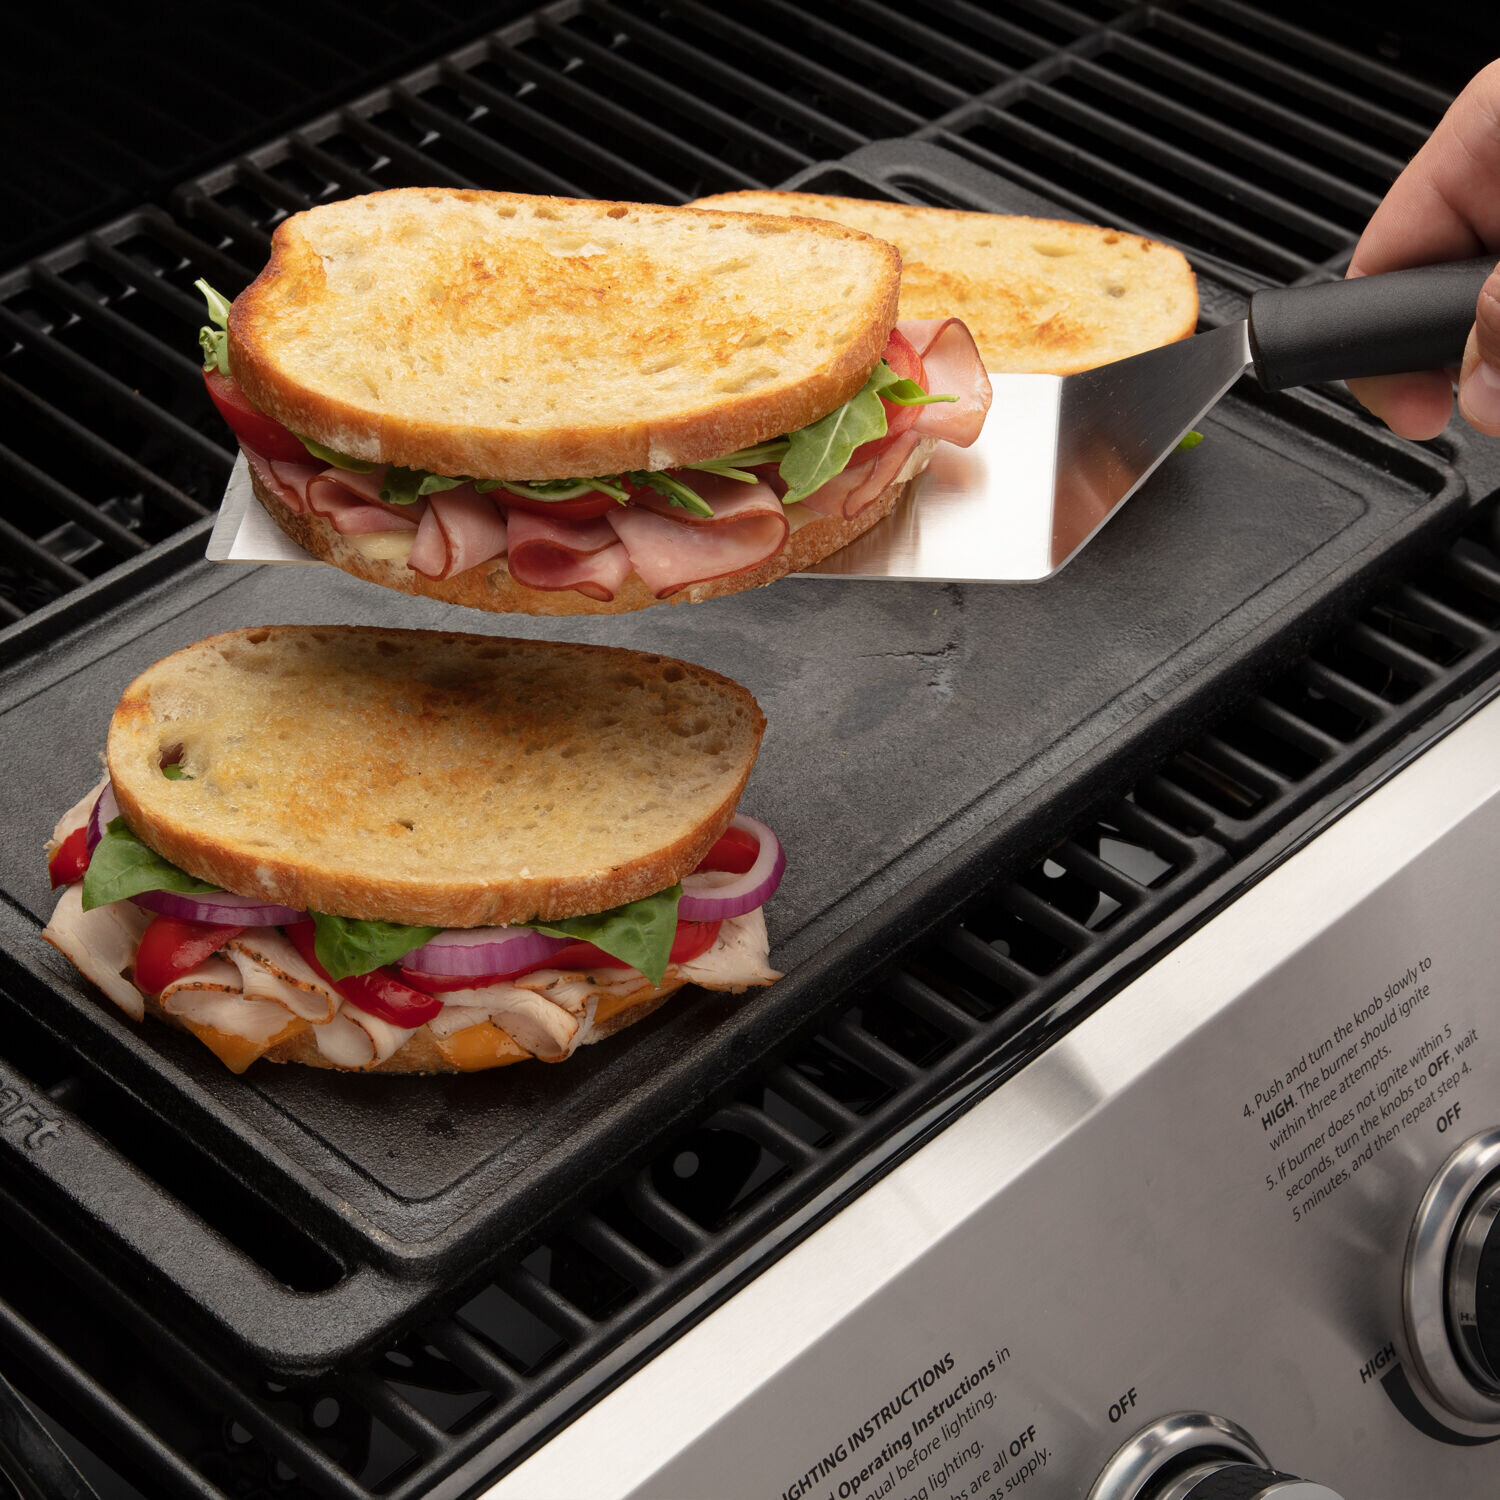 The Baking Steel Griddle Turns Your Crappy Stove Into a Diner-Style Flattop